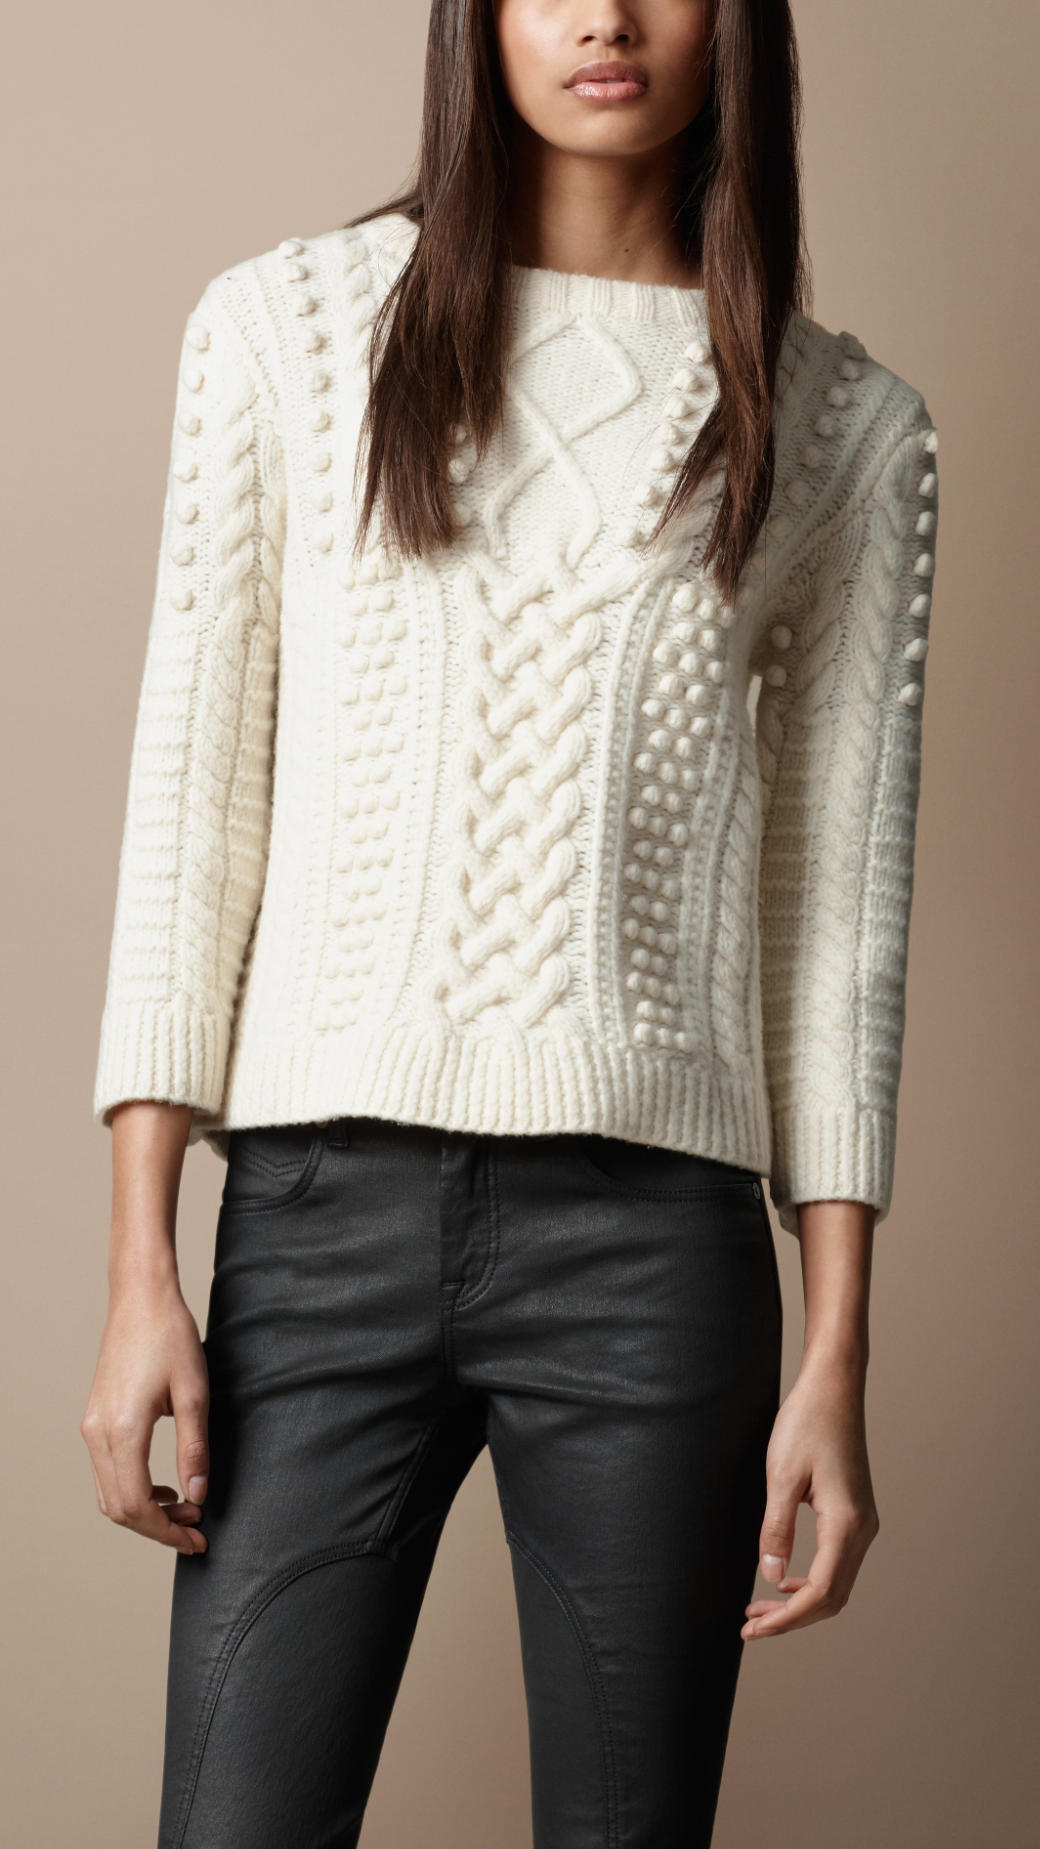 Lyst - Burberry Brit Cable Knit Sweater in White